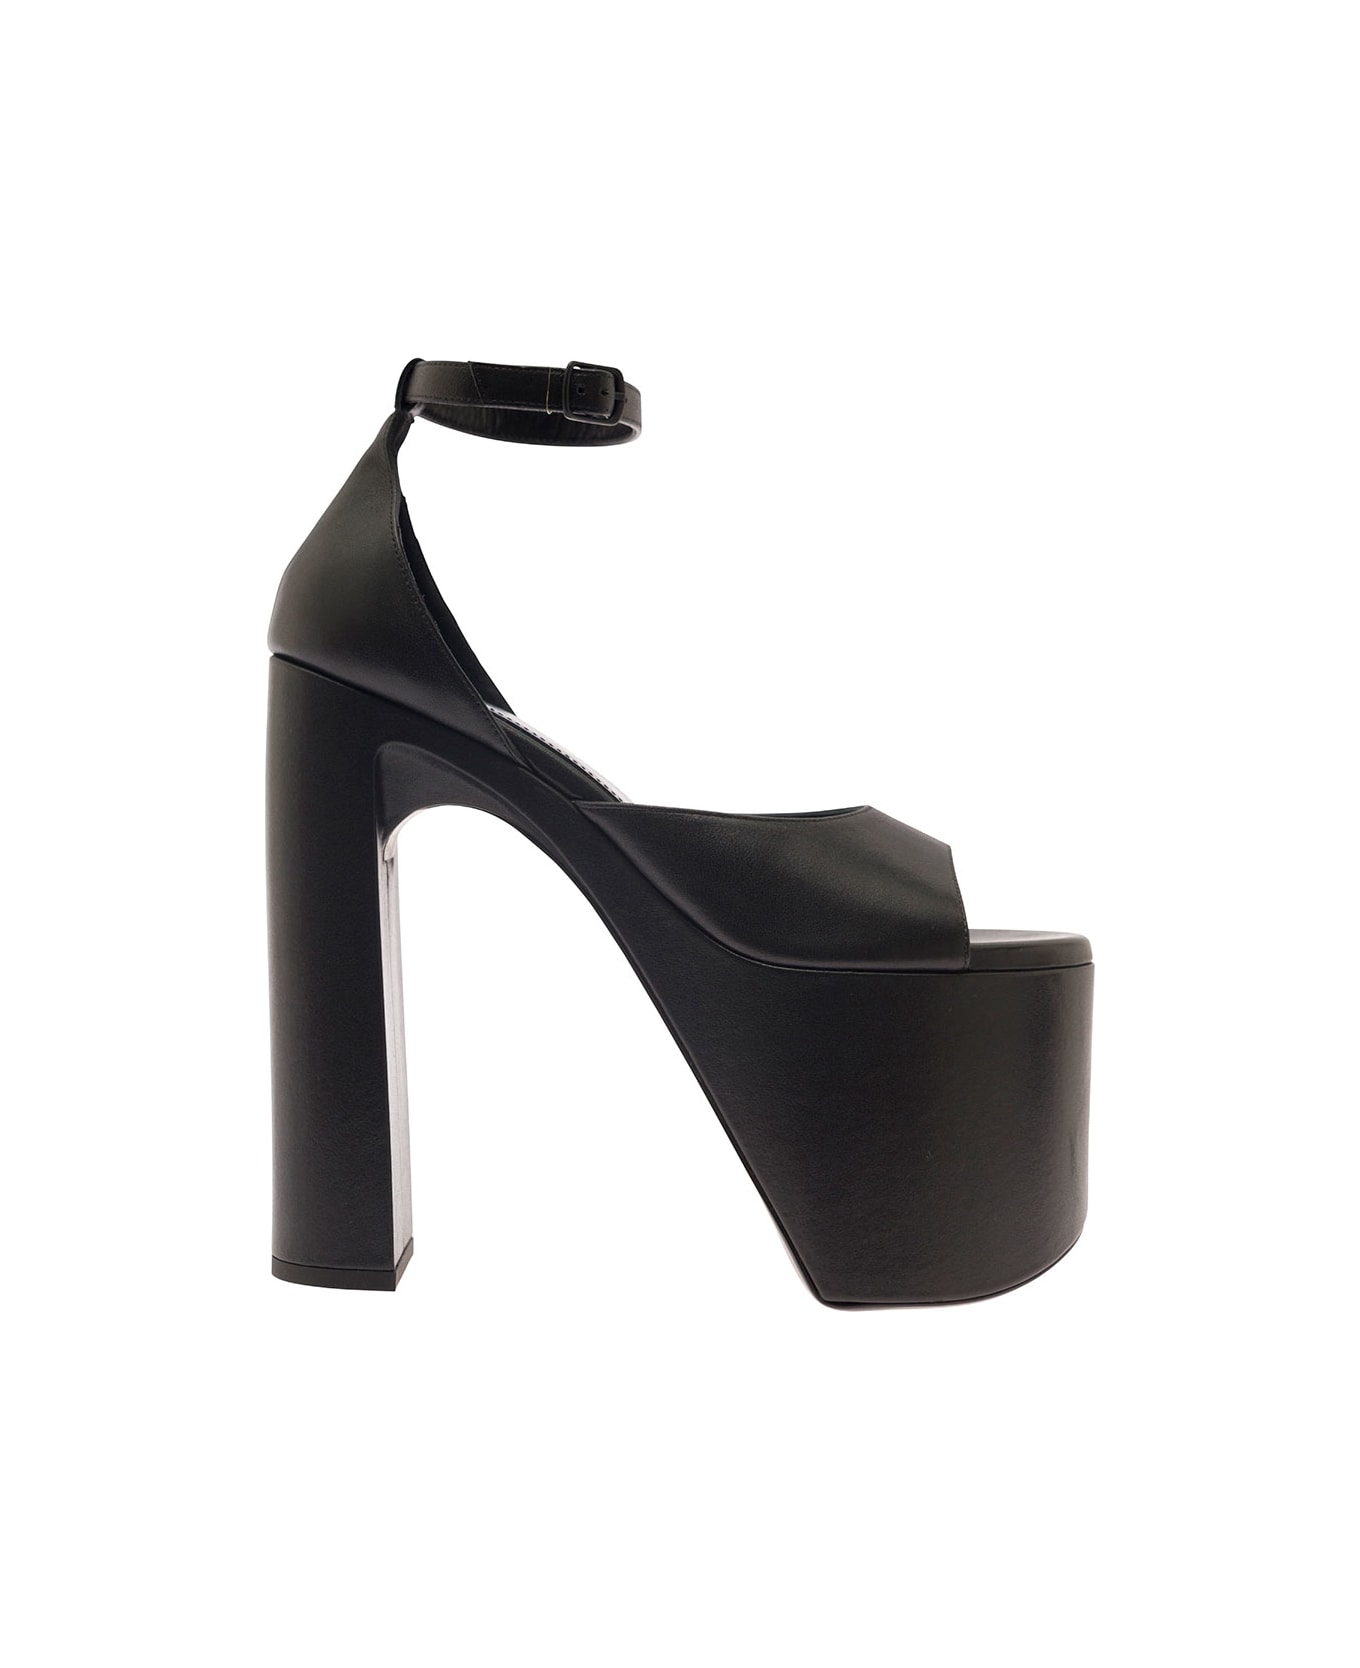 Balenciaga 'camden' Black Sandals With Oversized Platform In Smooth Leather Woman - Black